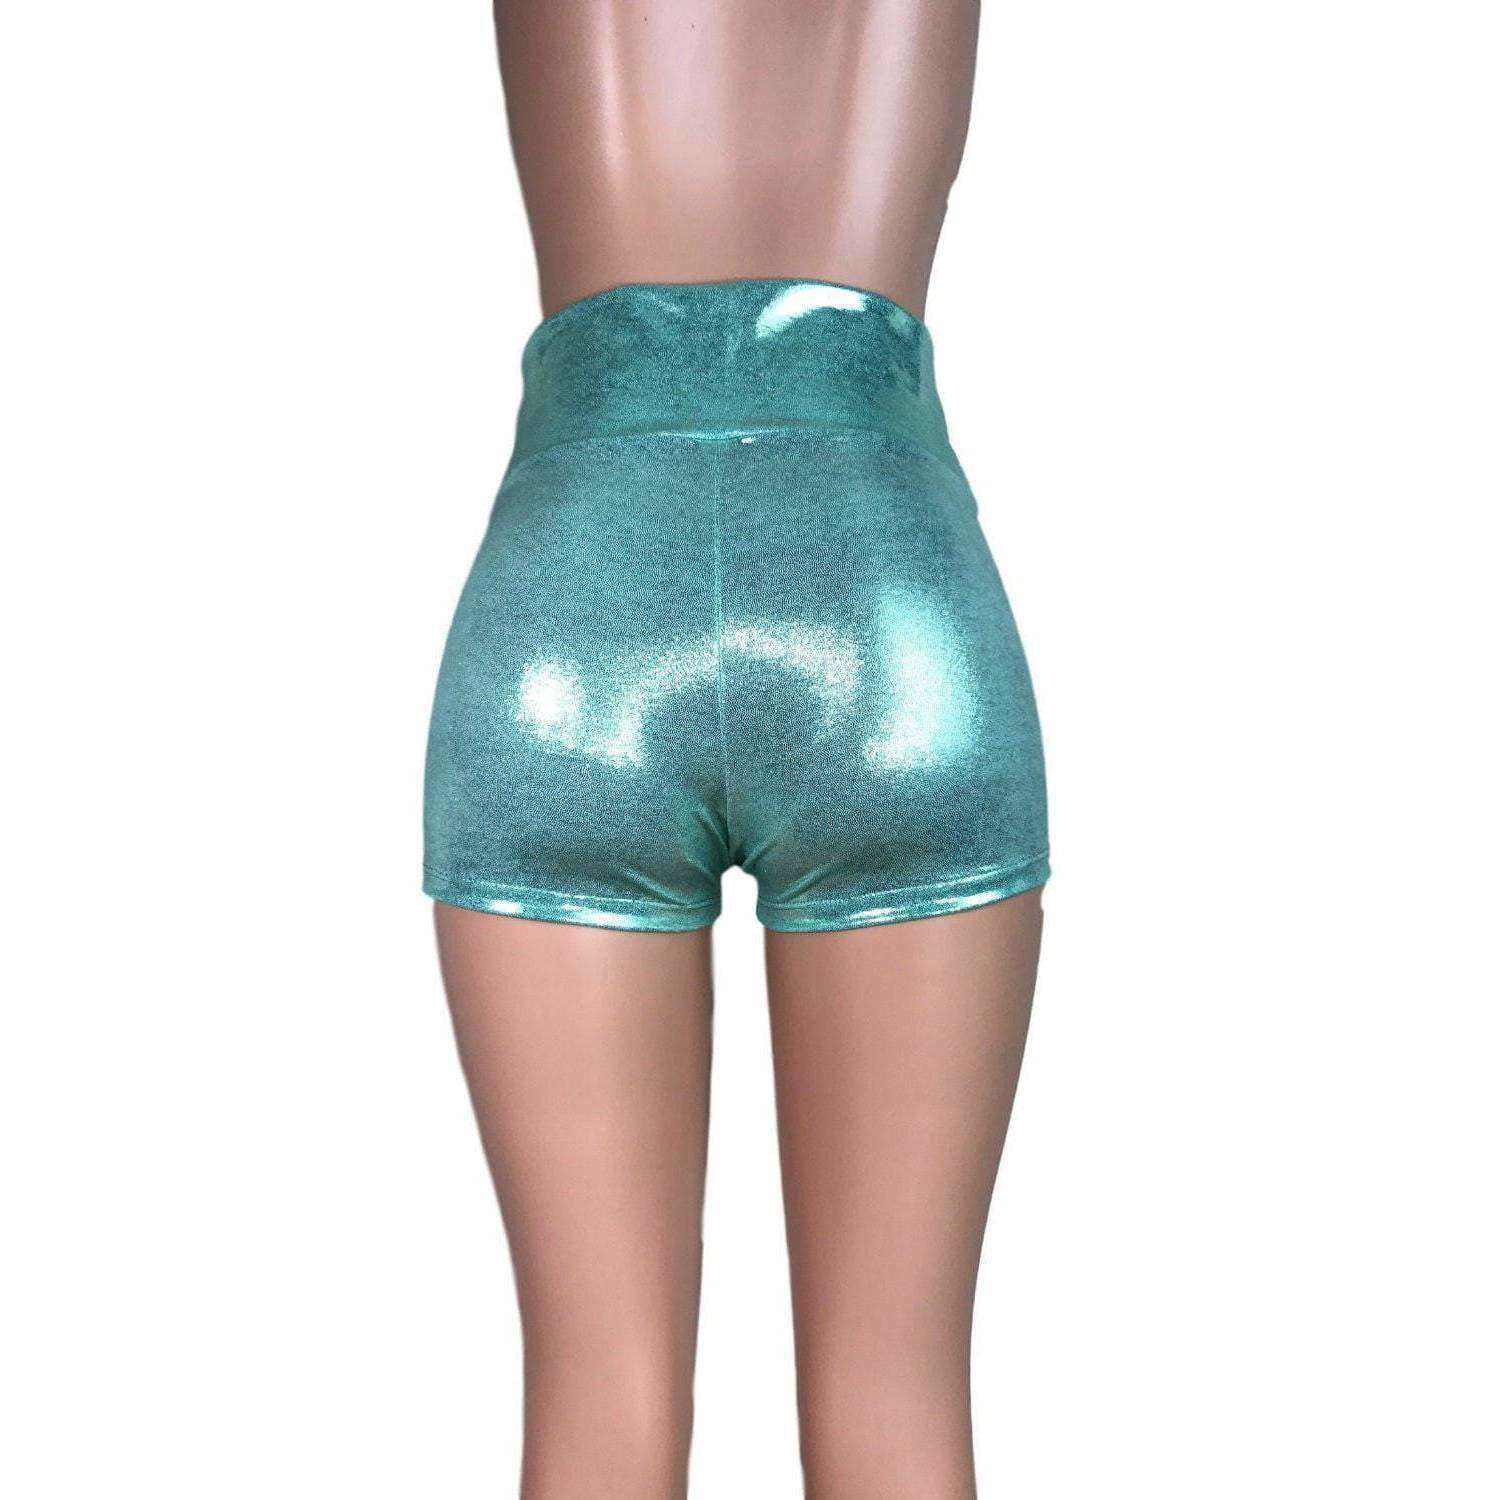 SALE - SMALL ONLY - High Waisted Booty Shorts - Mint Green Mystique